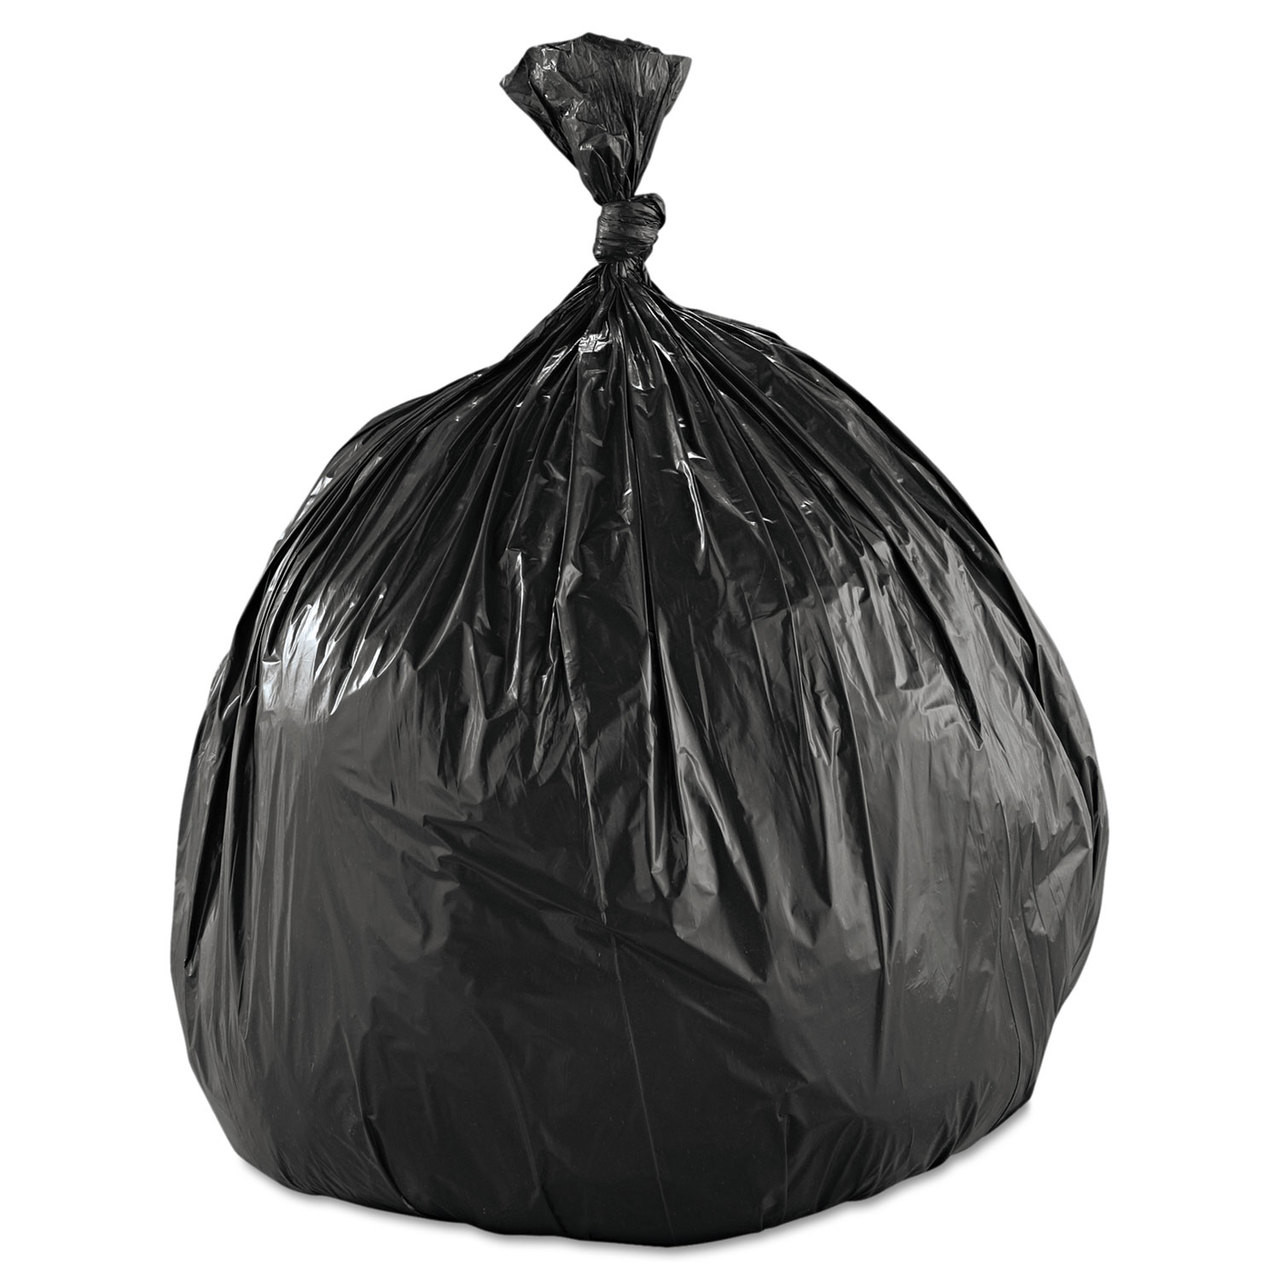 Zogics Trash Bags  56 Gallon Can Liners